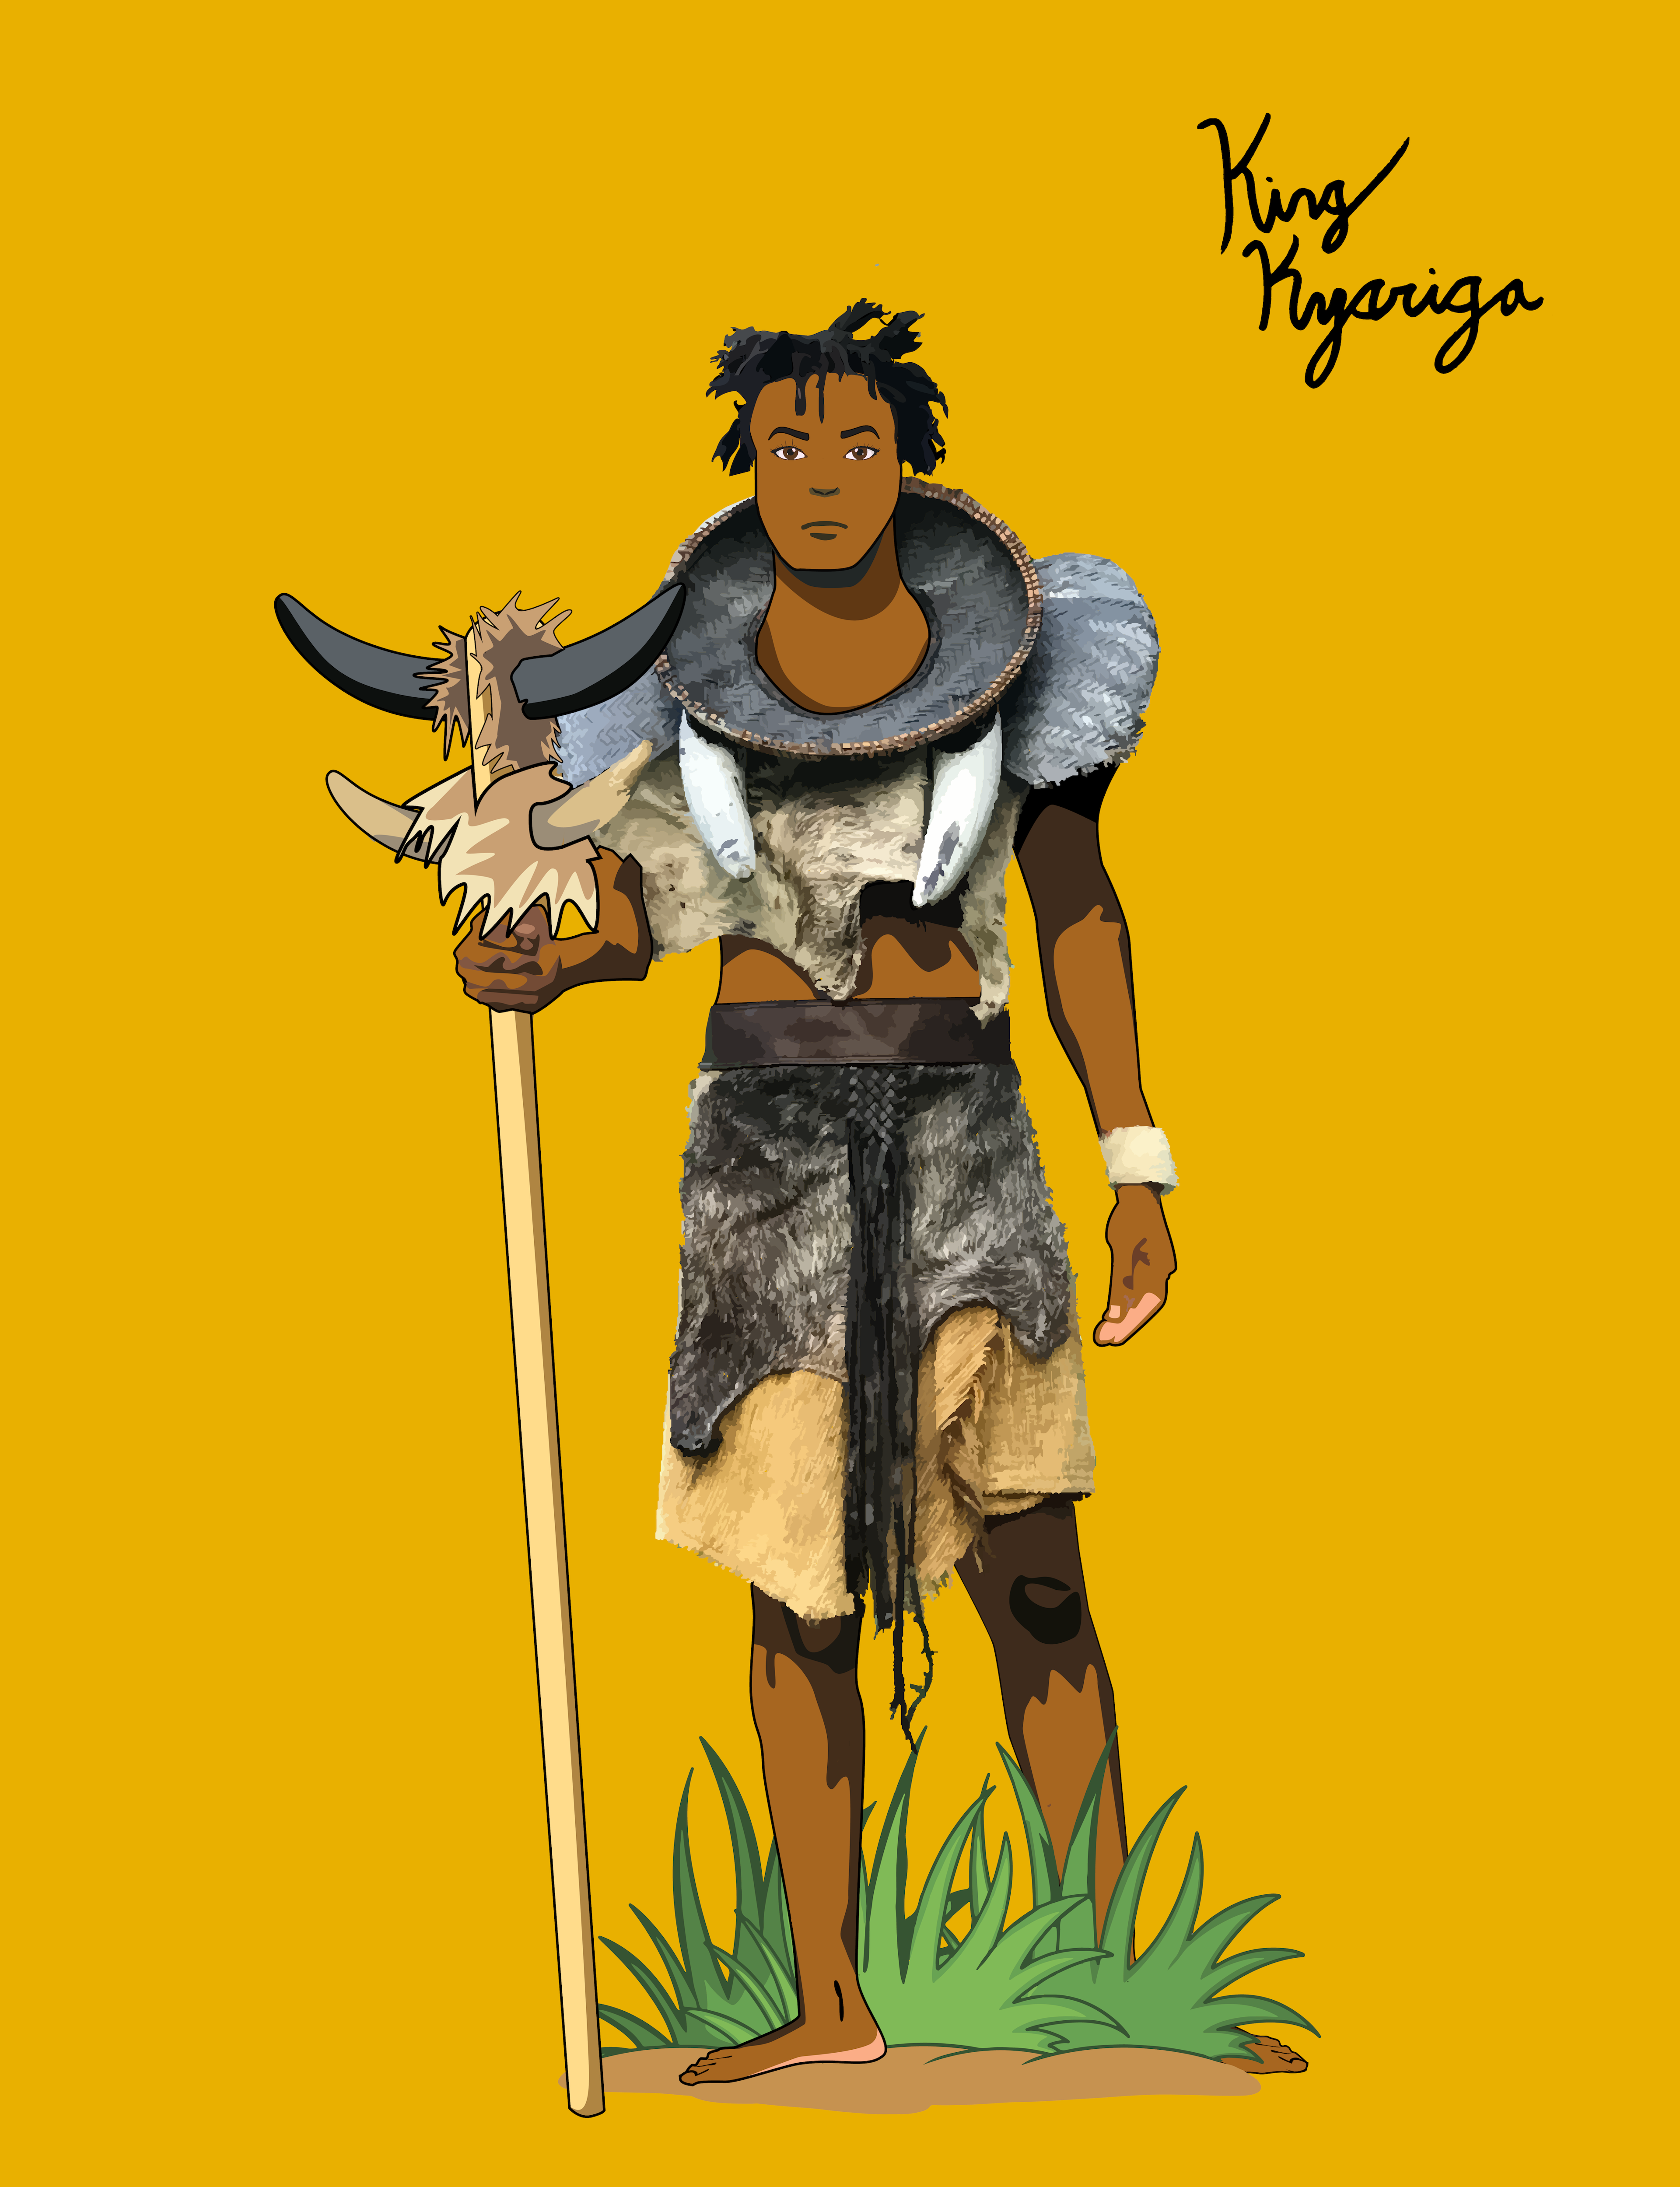 King Kyariga, a savage, barbaric con artist and puller of luxurious craftsman rugs. loves to pump Ponzi schemes. ironically exposes scams by promoting them, fostering Black financial literacy.